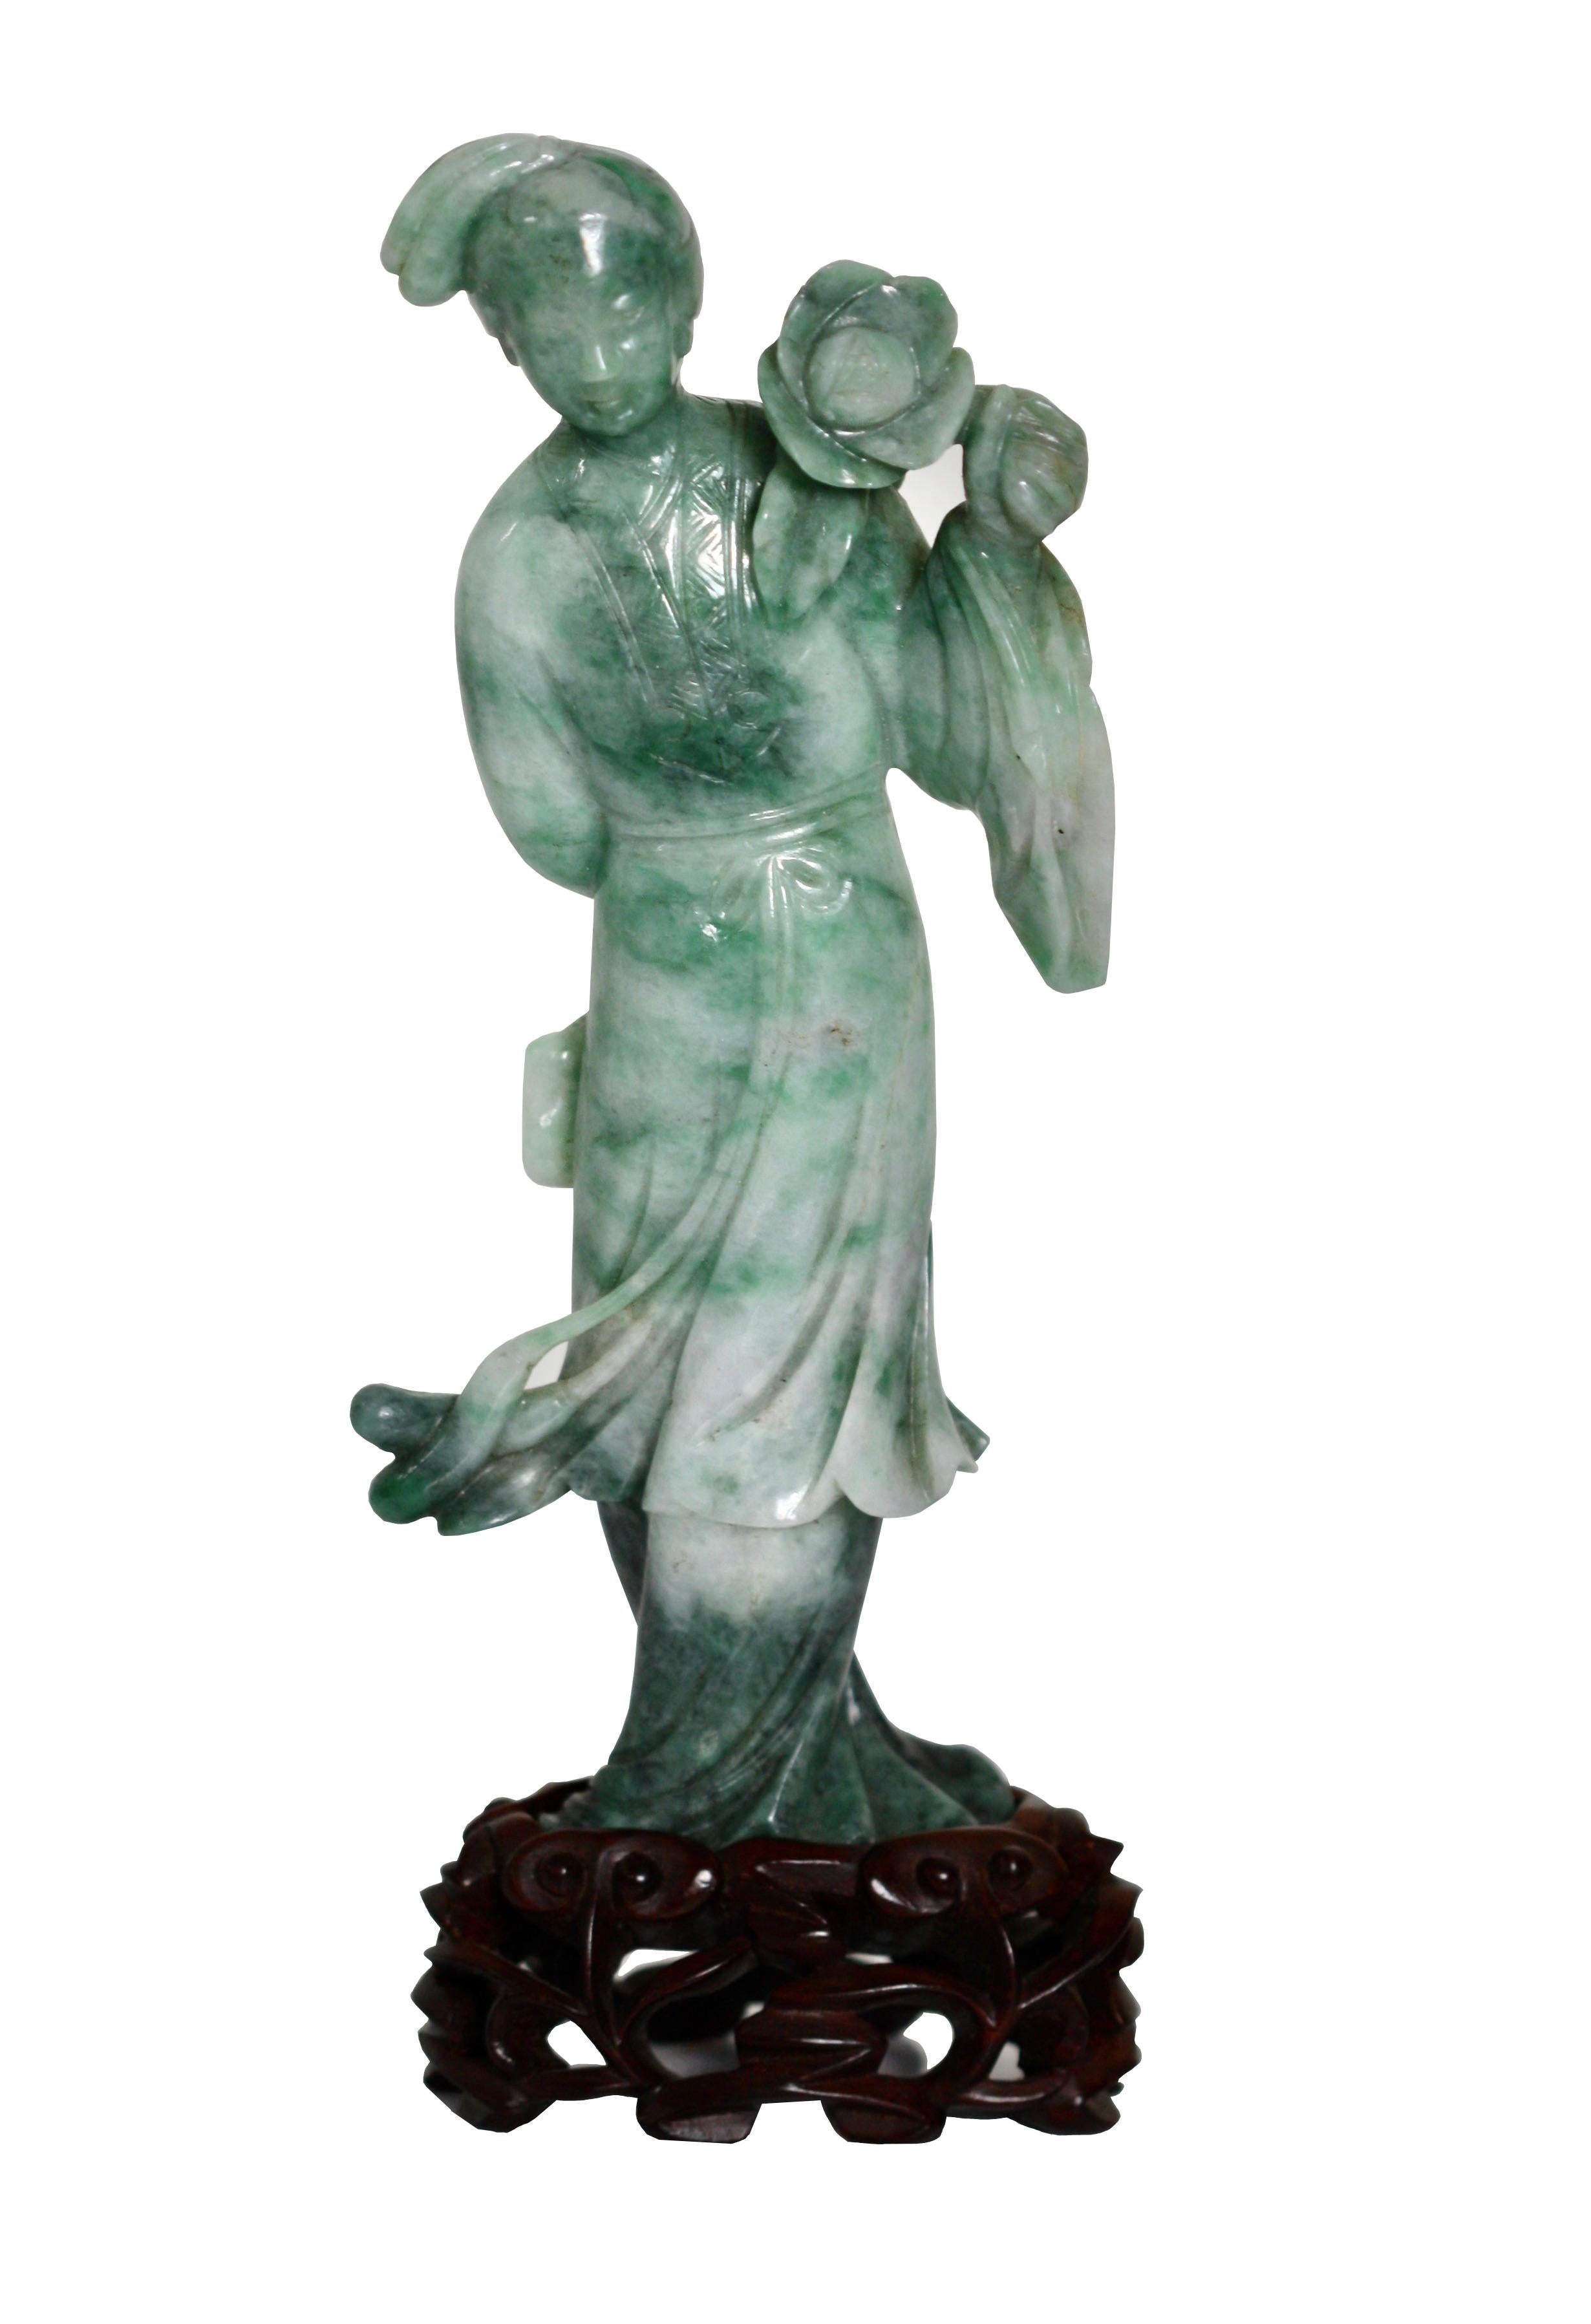 A Jadeite Figure of Guanyin, Chinese
Carved wearing long flowing robes, holding a flower, the lustrously polished stone with a long fissure ingeniously incorporated into the design, the back with some dark speckled inclusions, wood stand